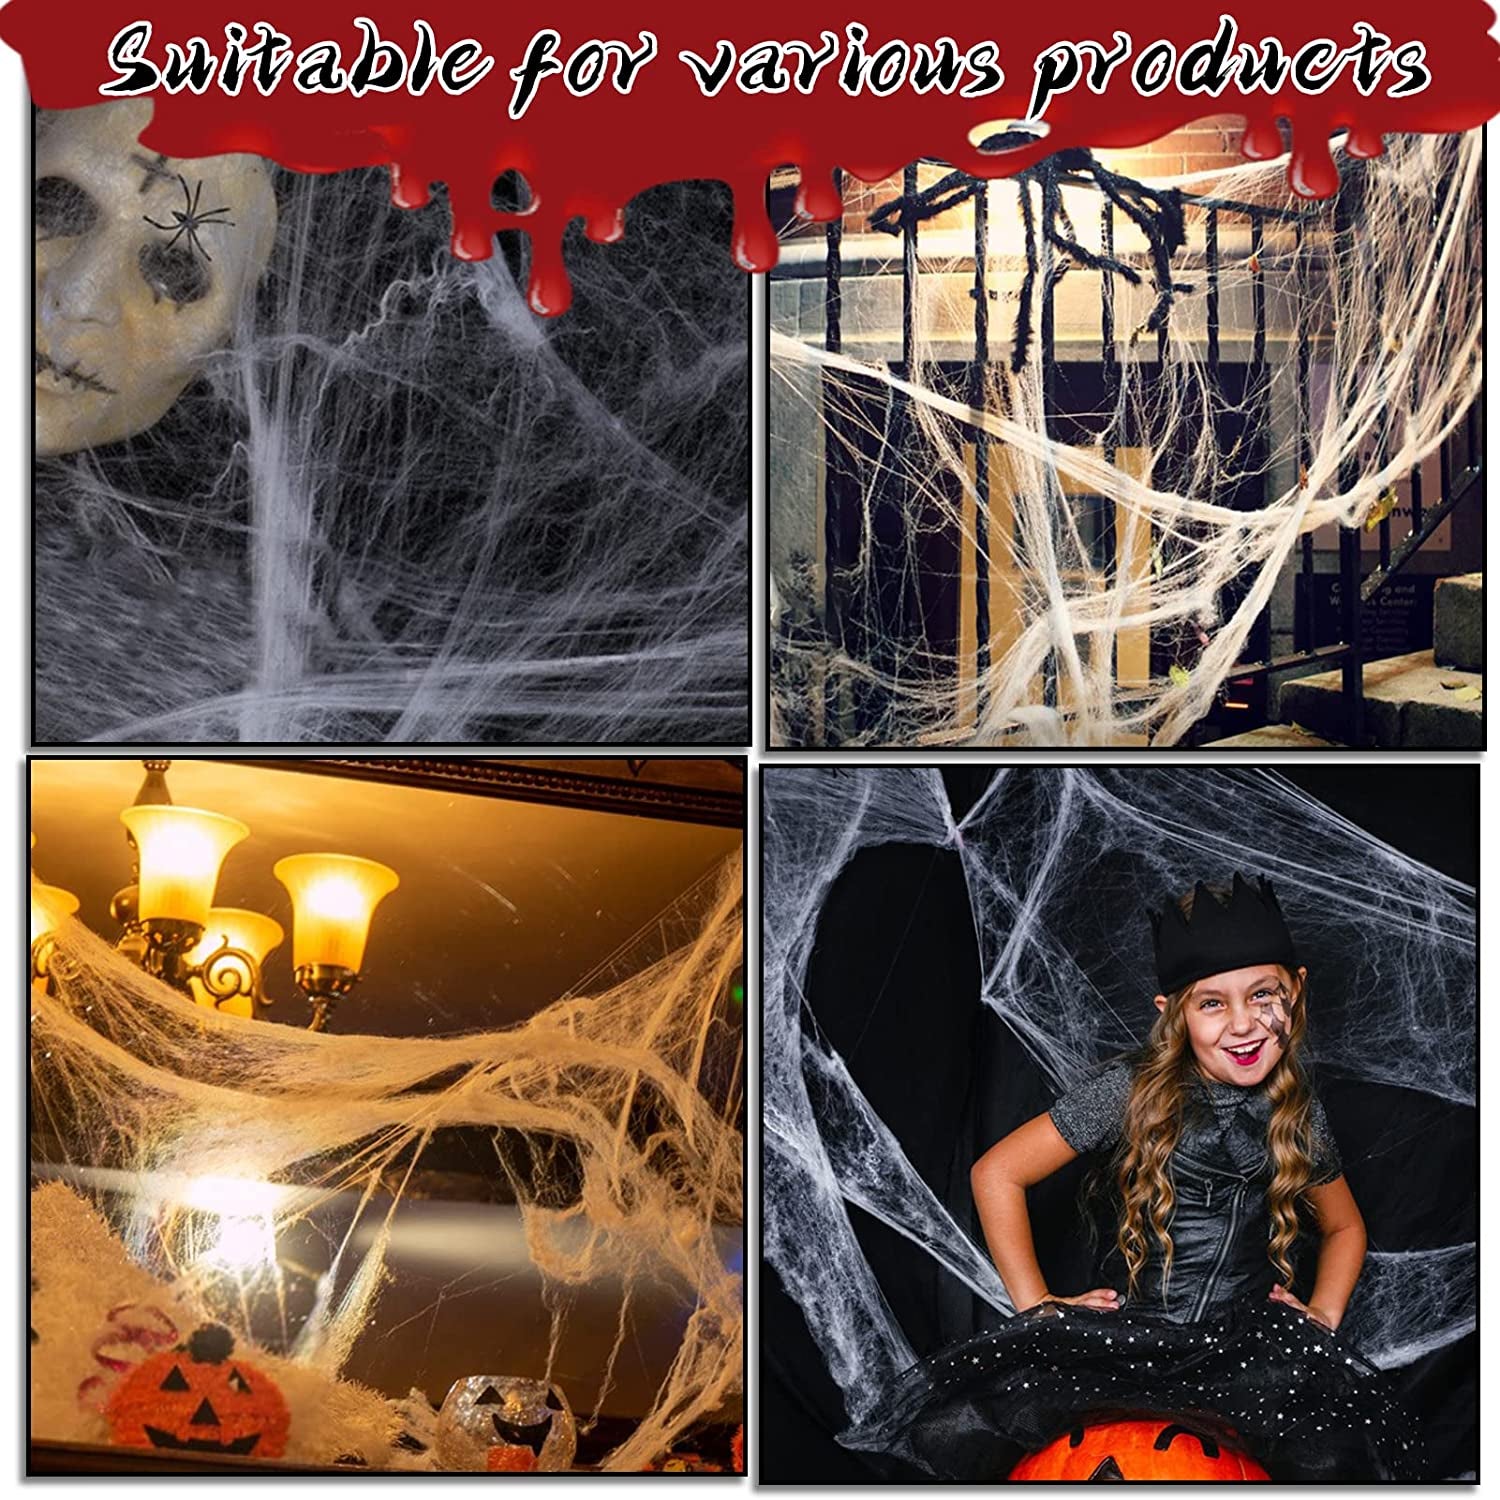 100G Halloween Spider Web Decoration, 50 Pcs Spiders Stretchable Stretch Cobweb for Halloween Haunted House Decor Scary Scence Party Supplies